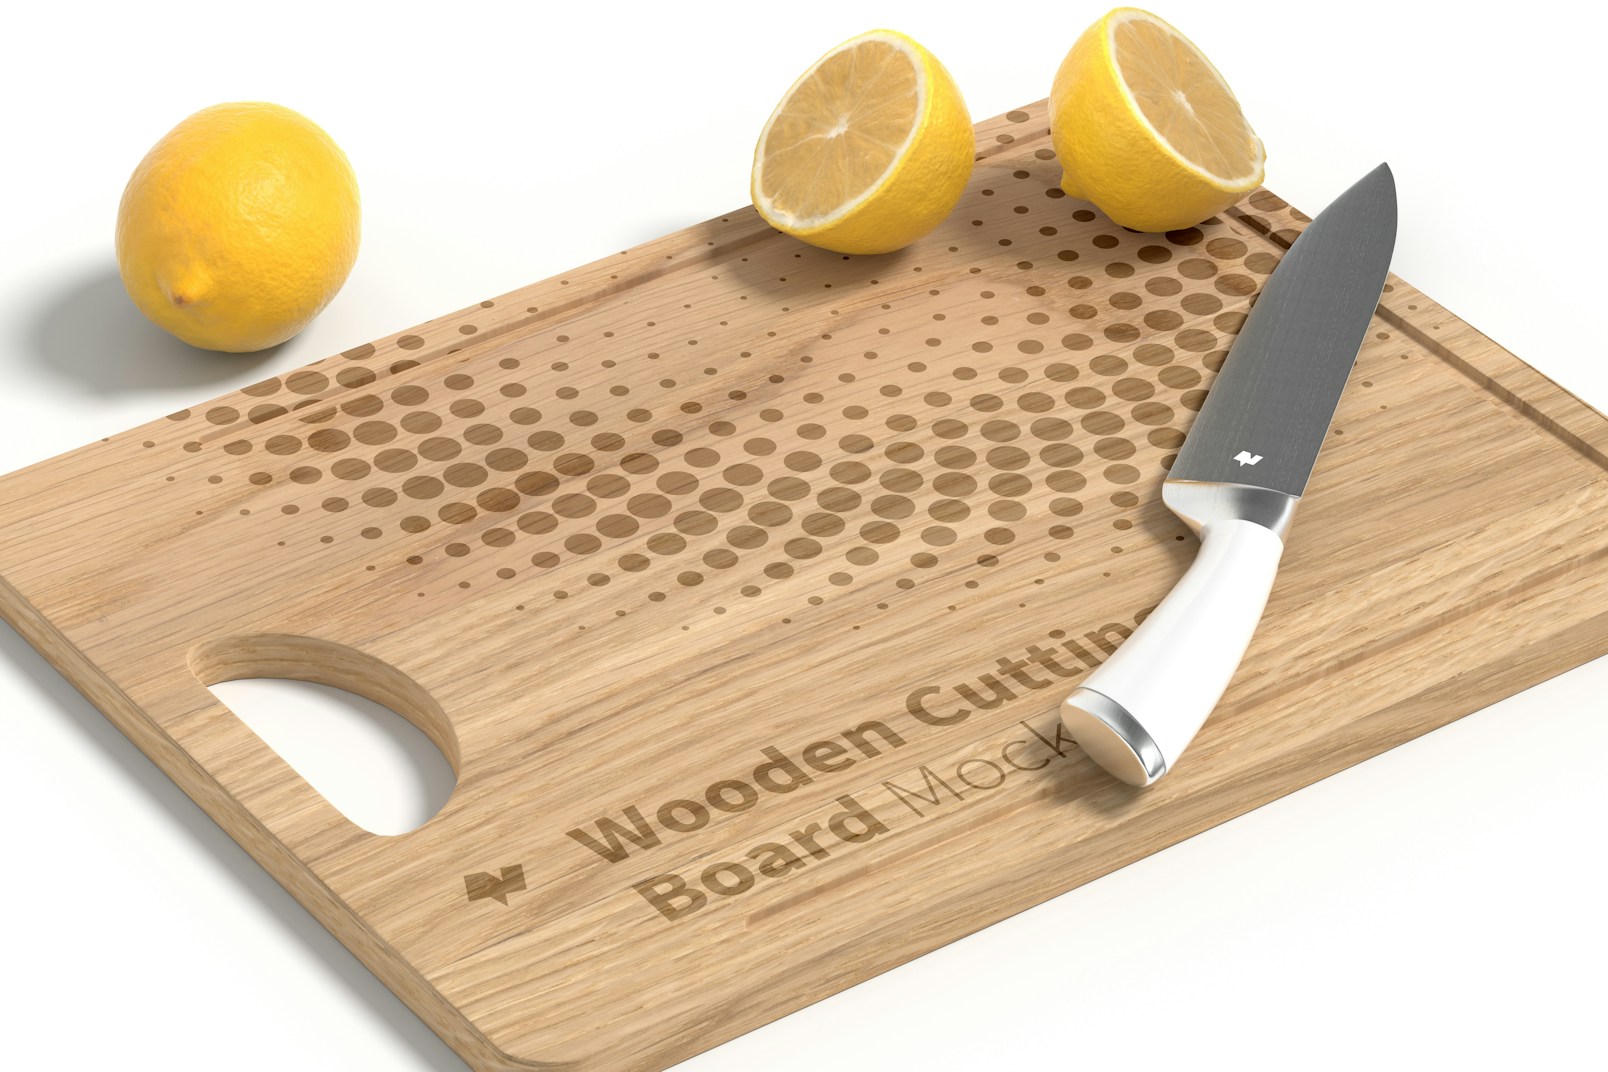 Wooden Cutting Board Mockup, Perspective